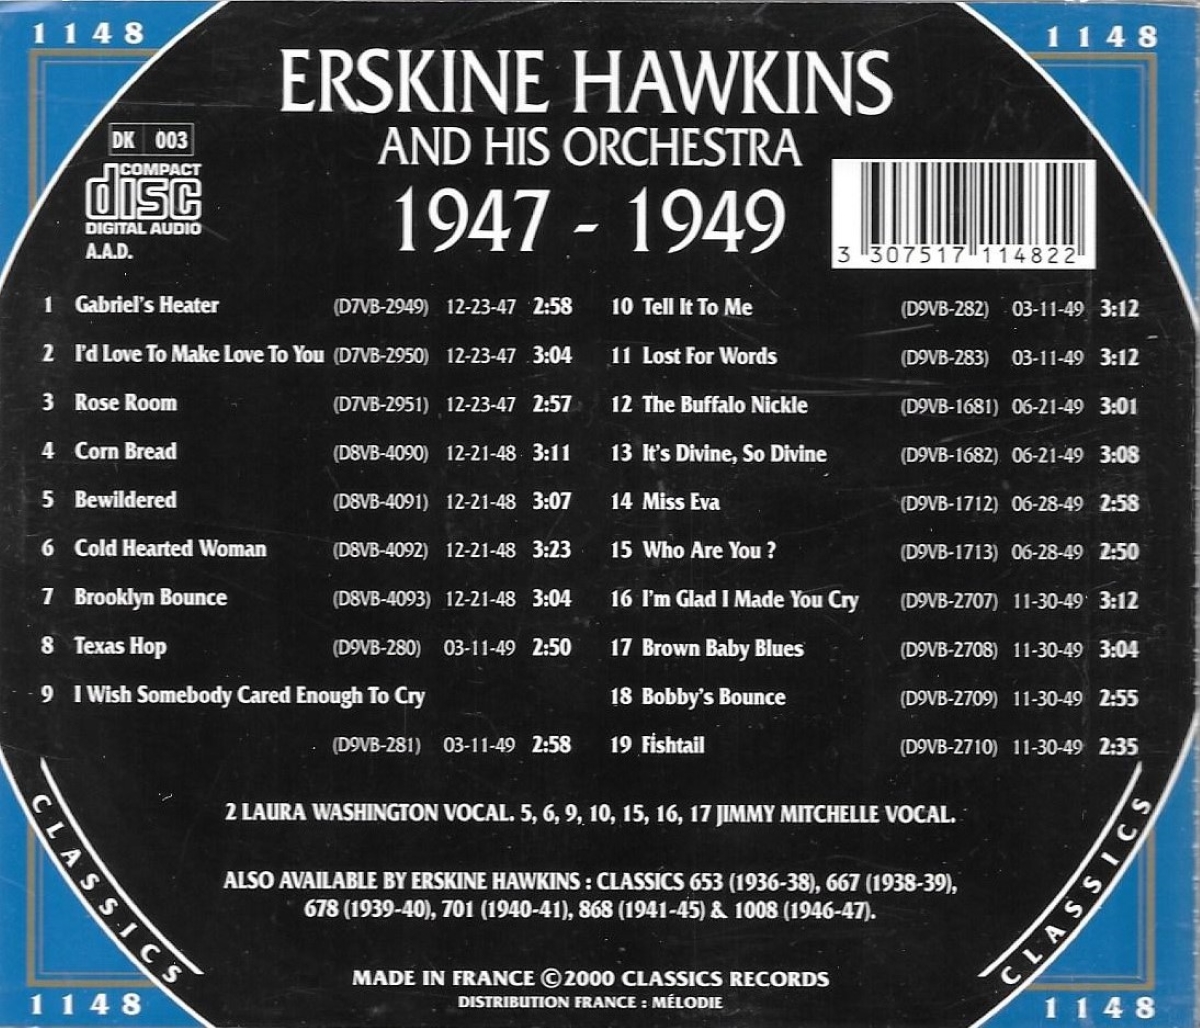 The Chronological Erskine Hawkins and His Orchestra-1947-1949